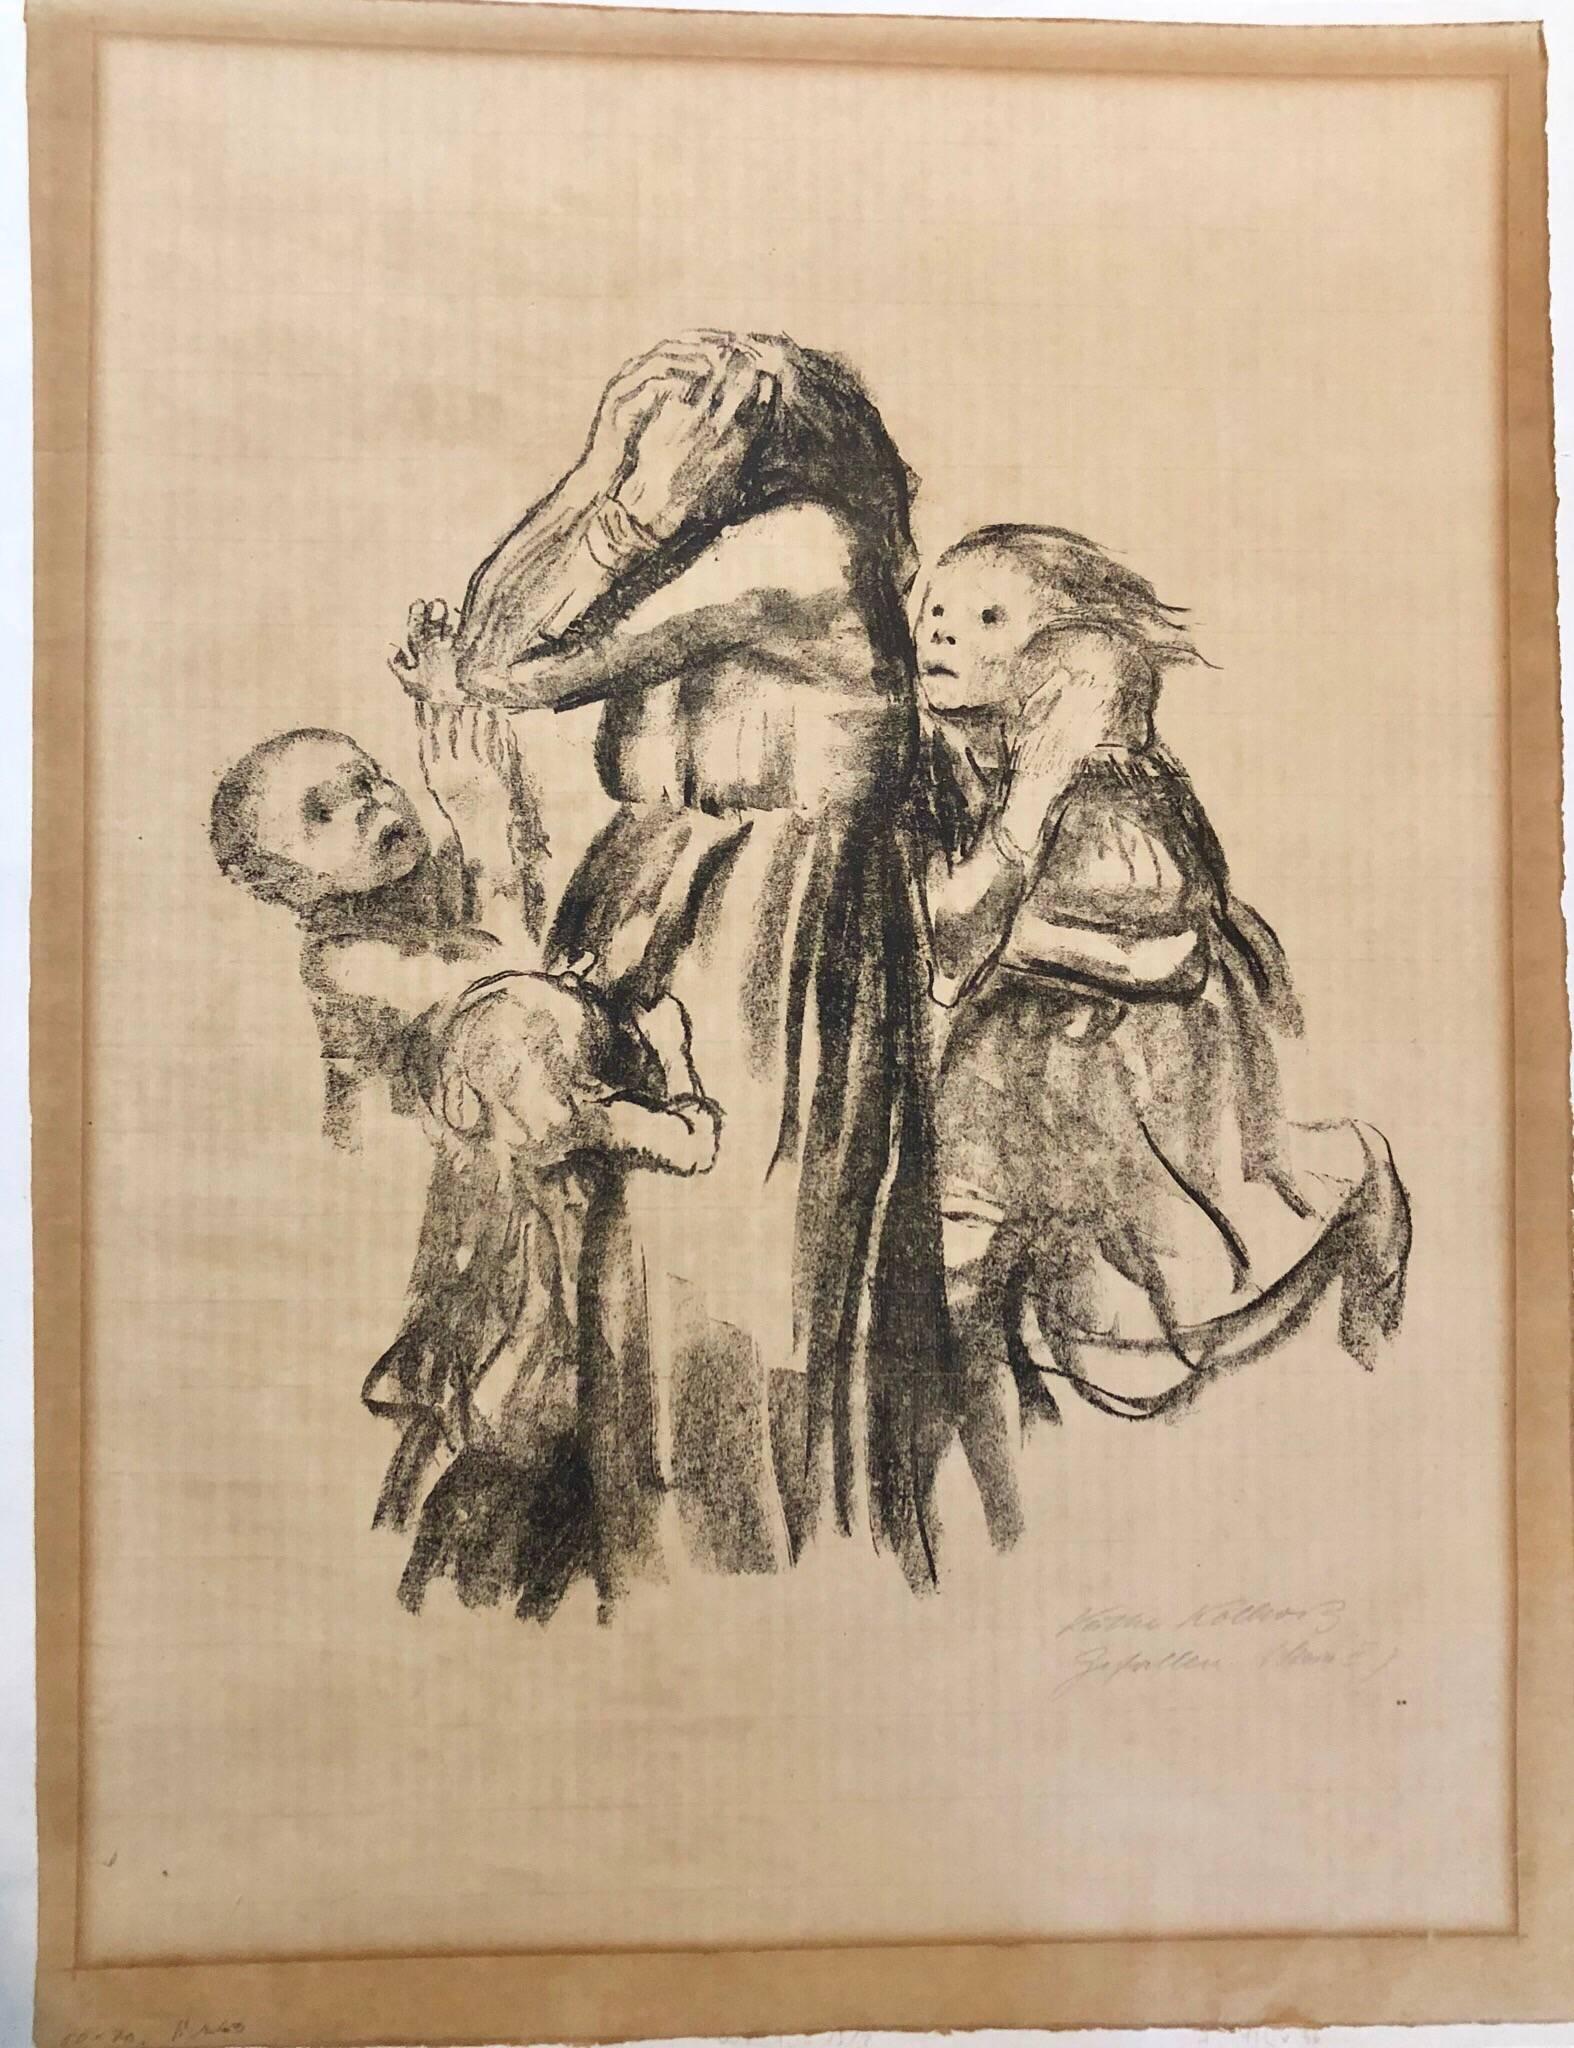 Killed in Action 'Gefallen' Grieving Family Original Lithograph - Print by Käthe Kollwitz